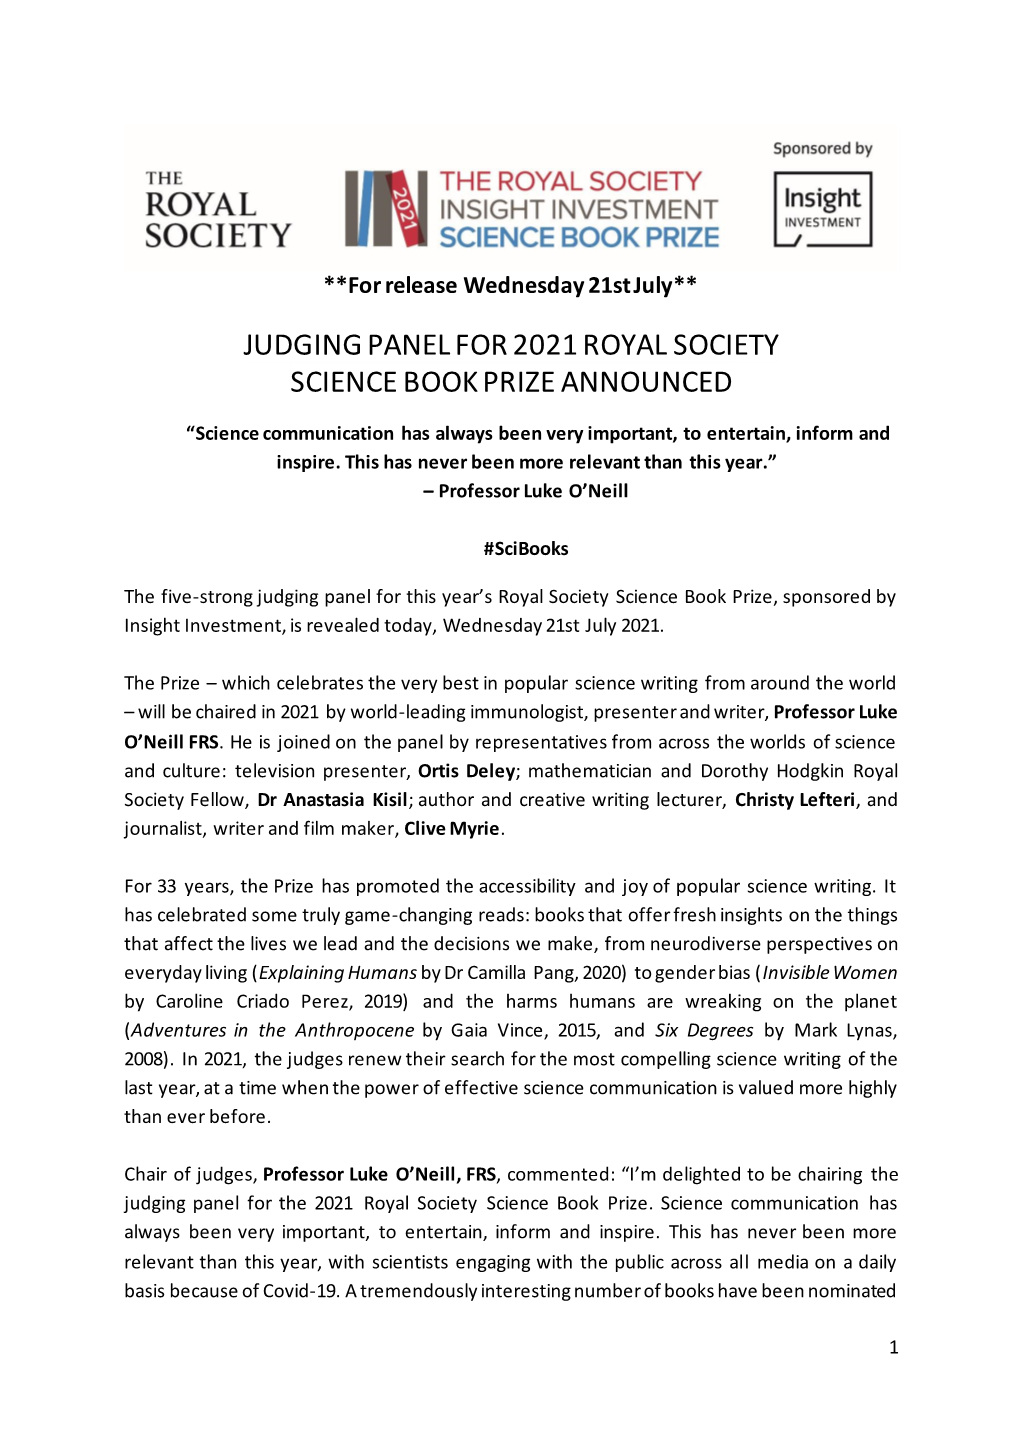 Judging Panel for 2021 Royal Society Science Book Prize Announced